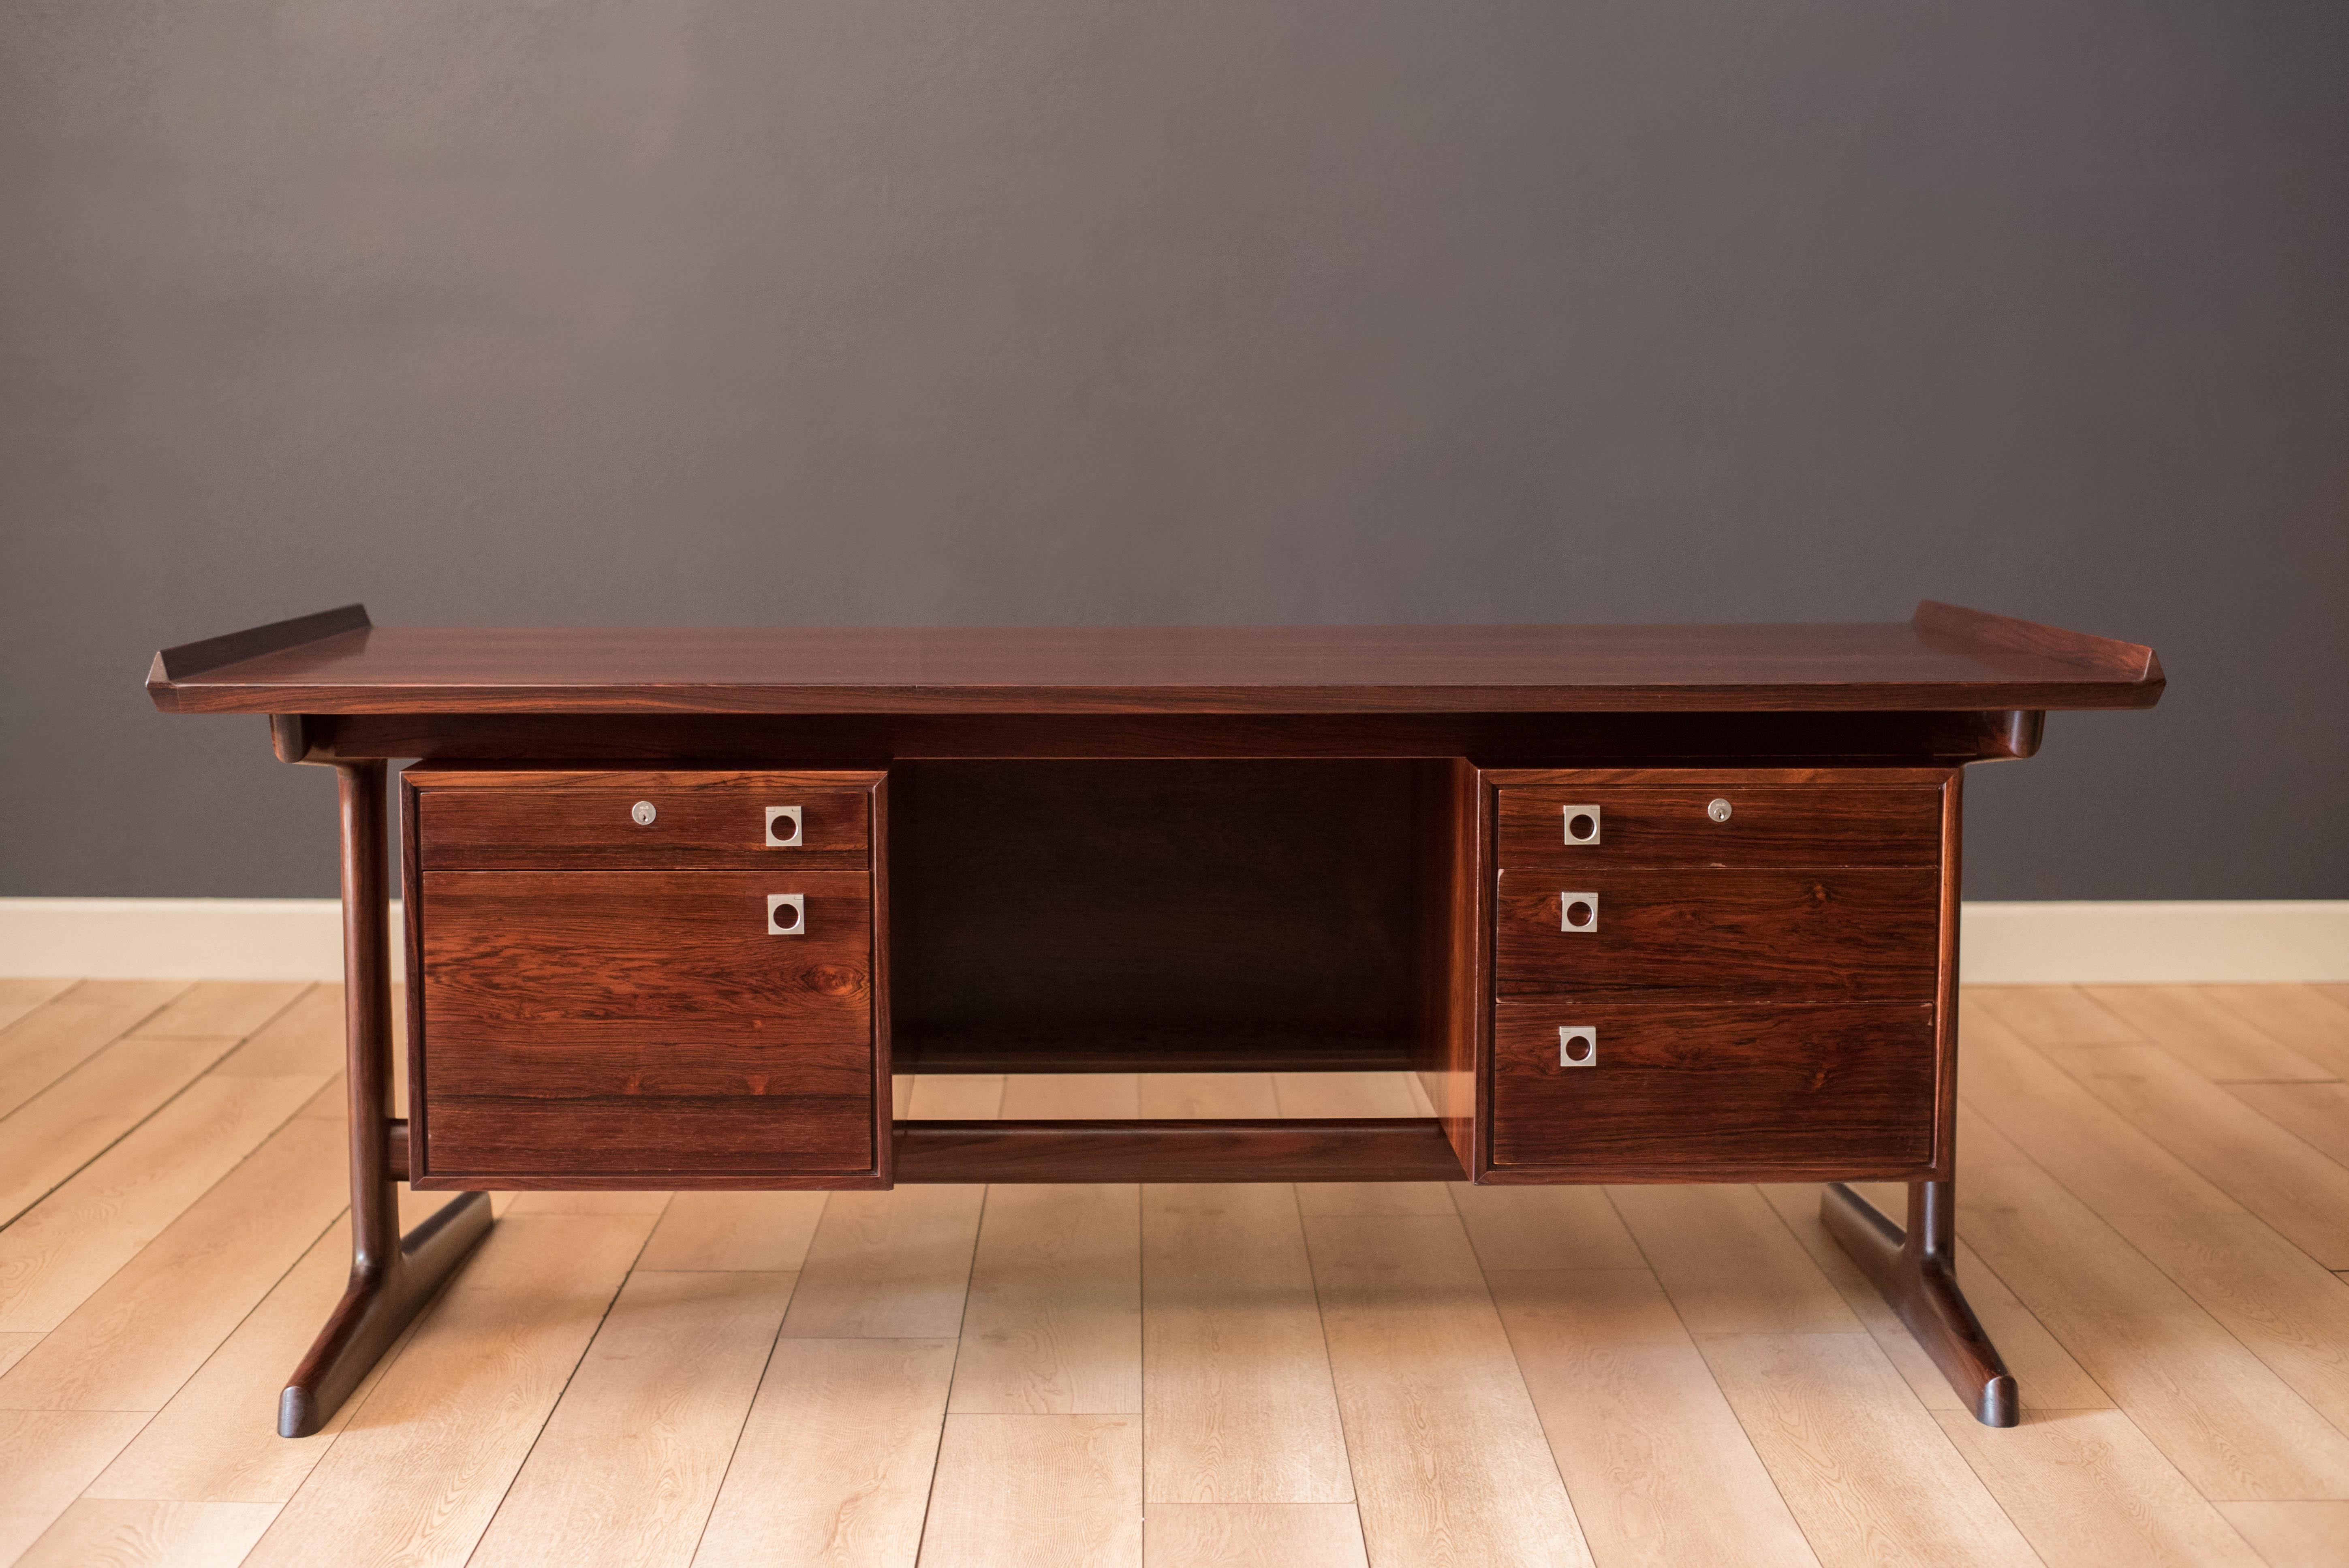 Mid-Century Modern executive desk in rosewood by H.P. Hansen, Denmark circa 1960s. Features a floating top with raised lip edges and a unique external supporting leg base. This piece offers plenty of storage equipped with five dovetailed drawers